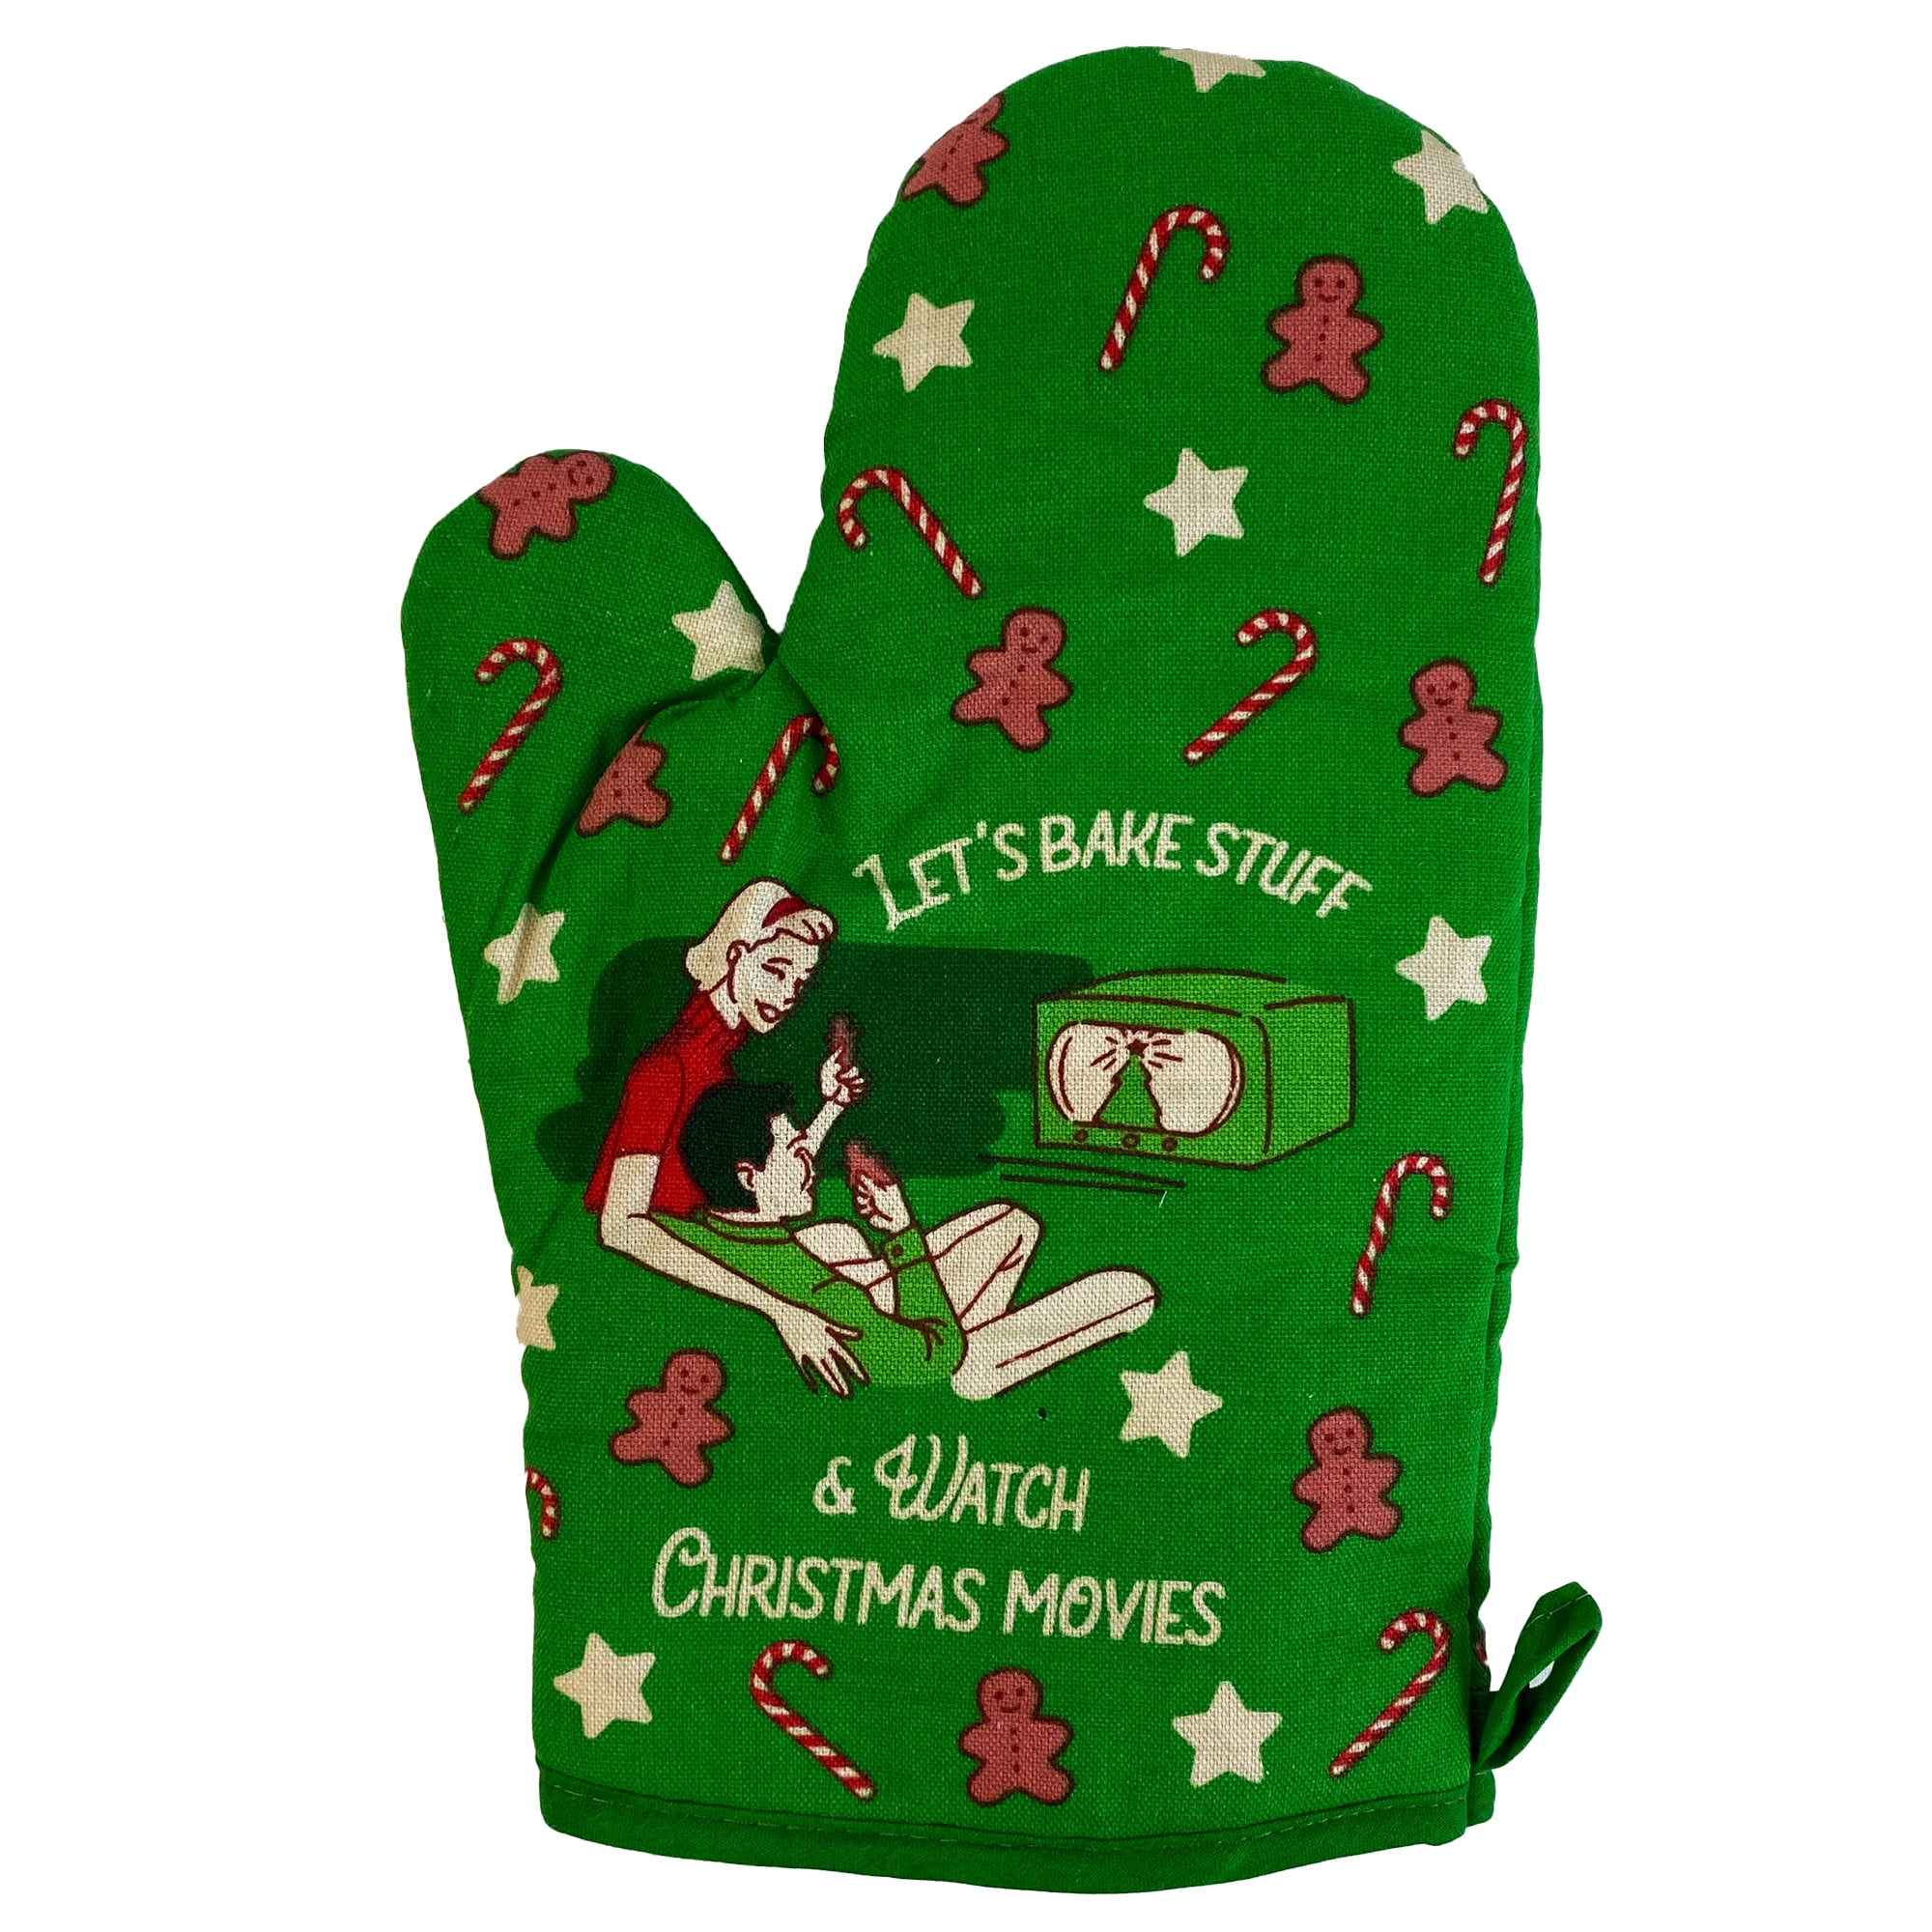 Fold in the Cheese Funny Oven Mitts Cute Pair Kitchen Potholders Gloves  Cooking Baking Grilling Non Slip Cotton 